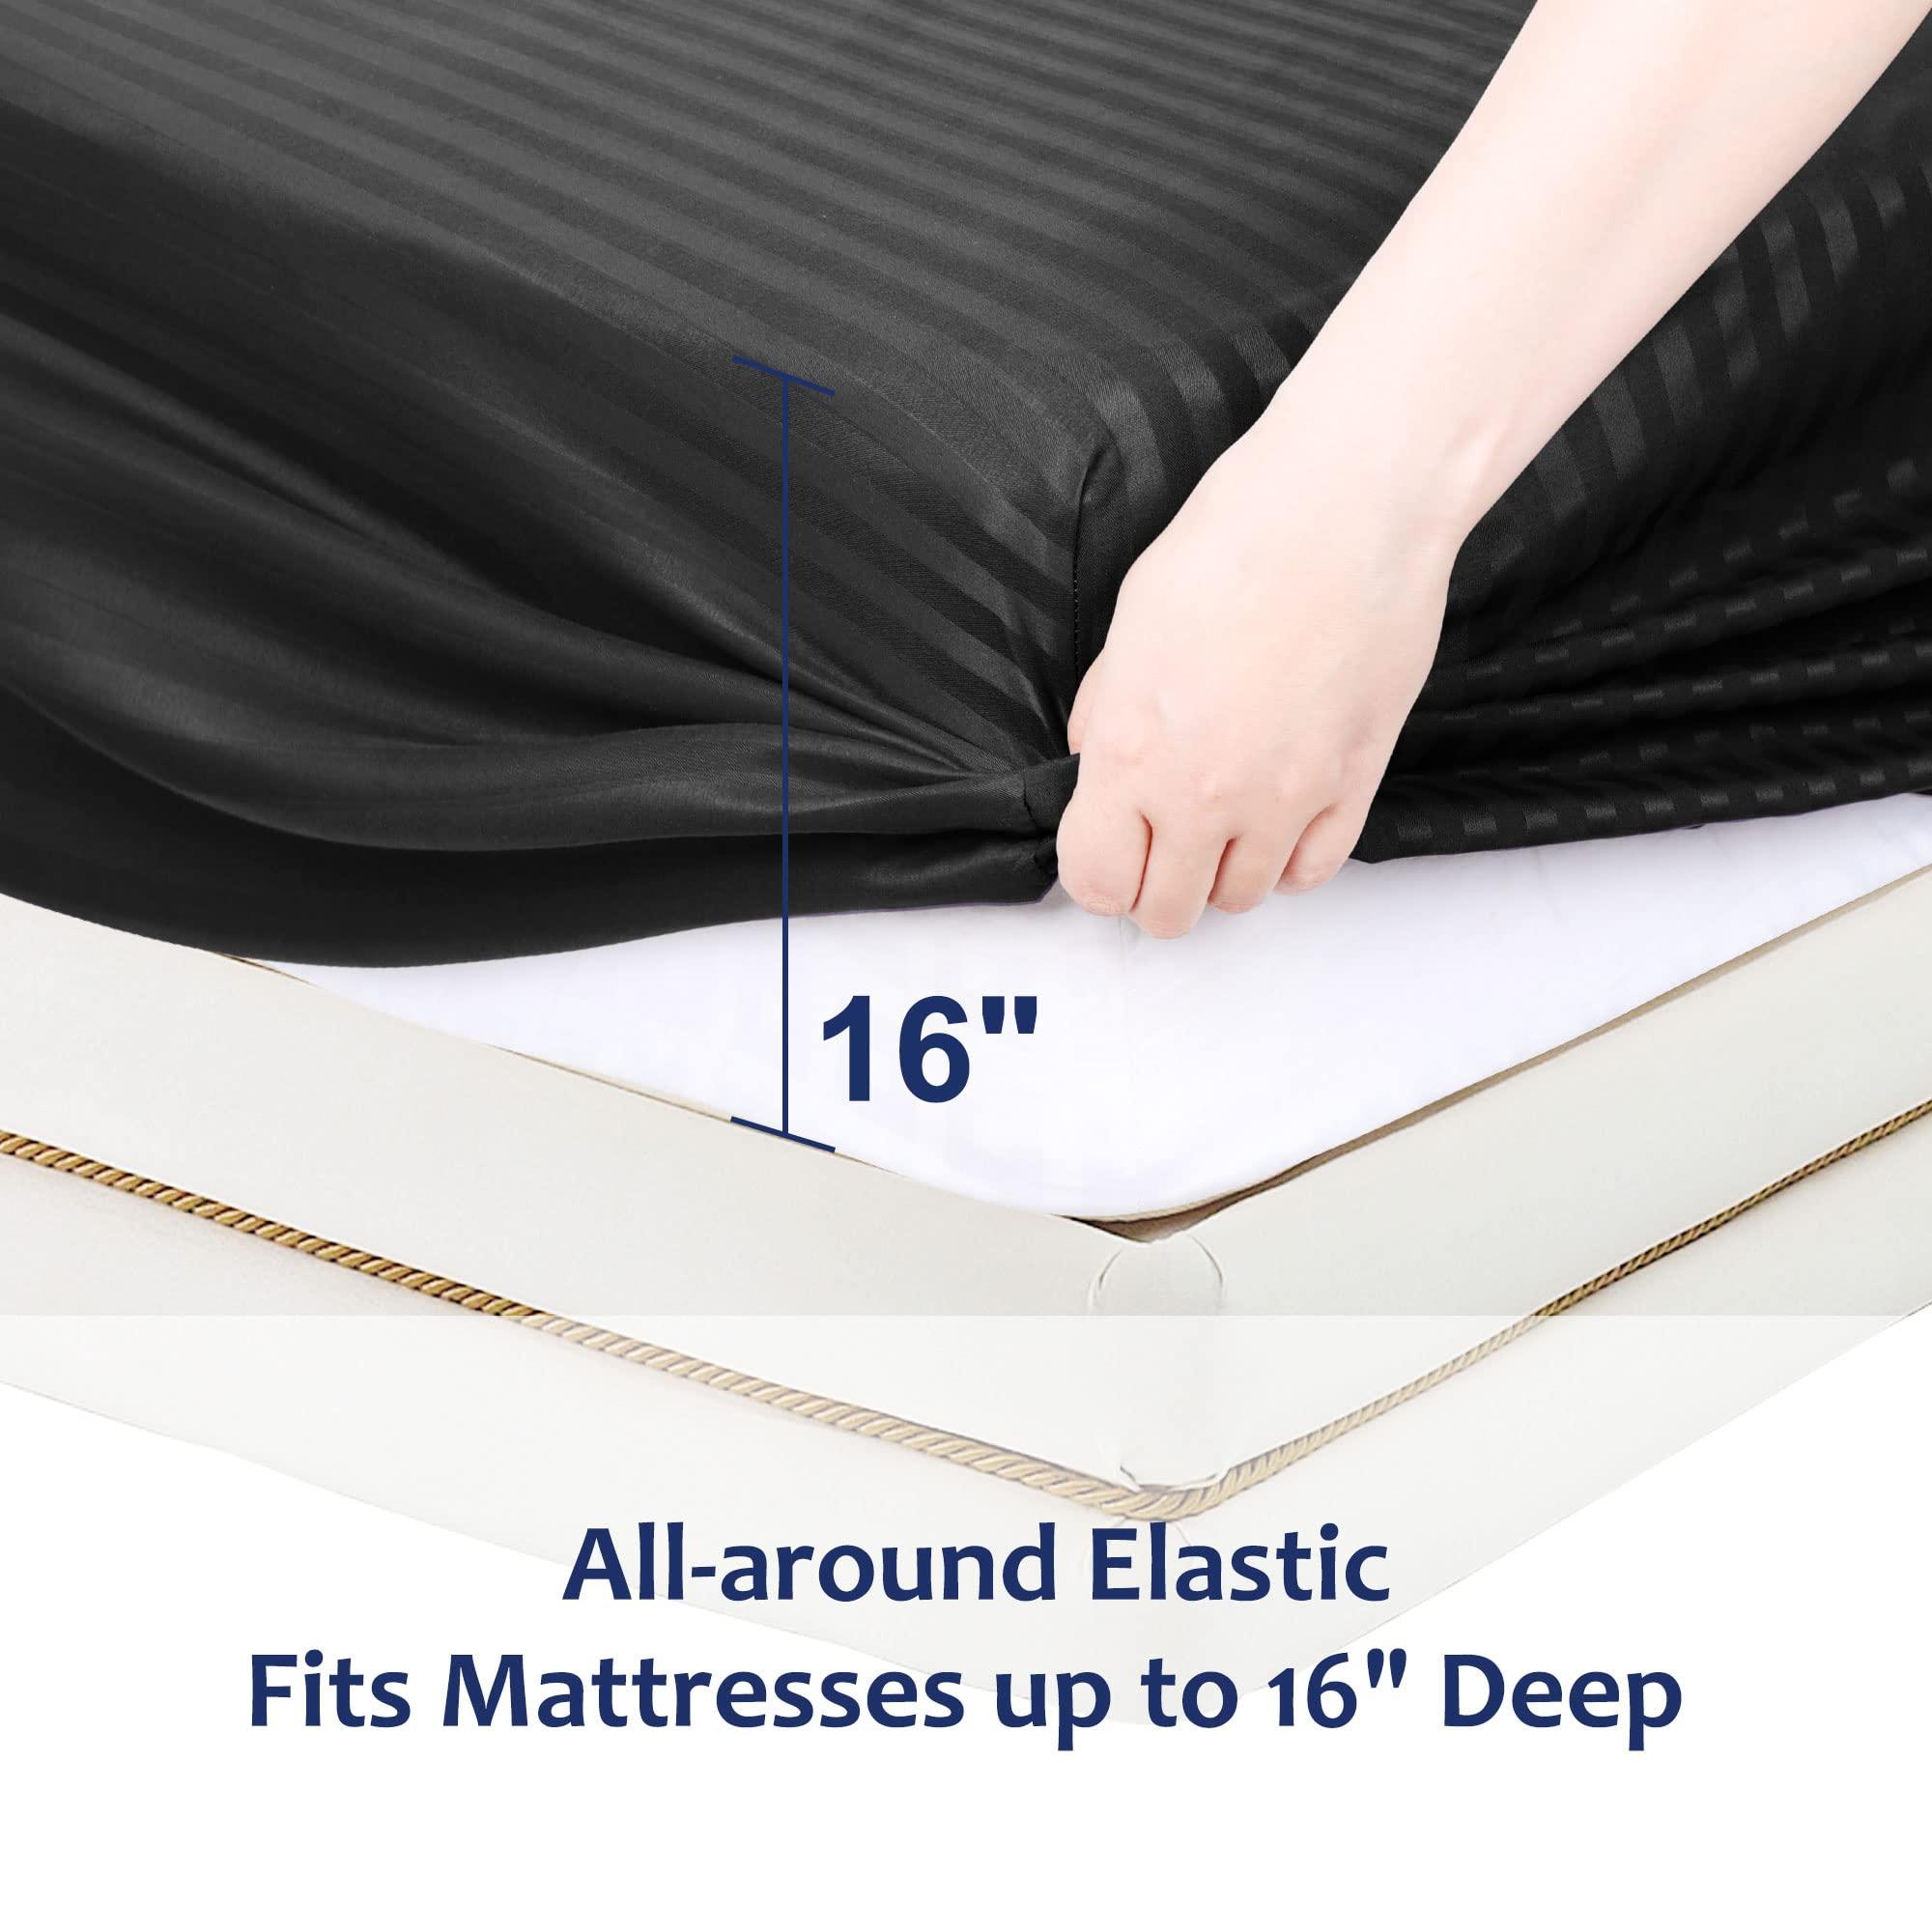 PiccoCasa 100GSM Microfiber Striped Bed Fitted Sheet, 16 Inch Deep Pocket Bed Mattress Cover, Durable Soft Breathable Wrinkle Resistant Bottom Sheets Black Super King 3